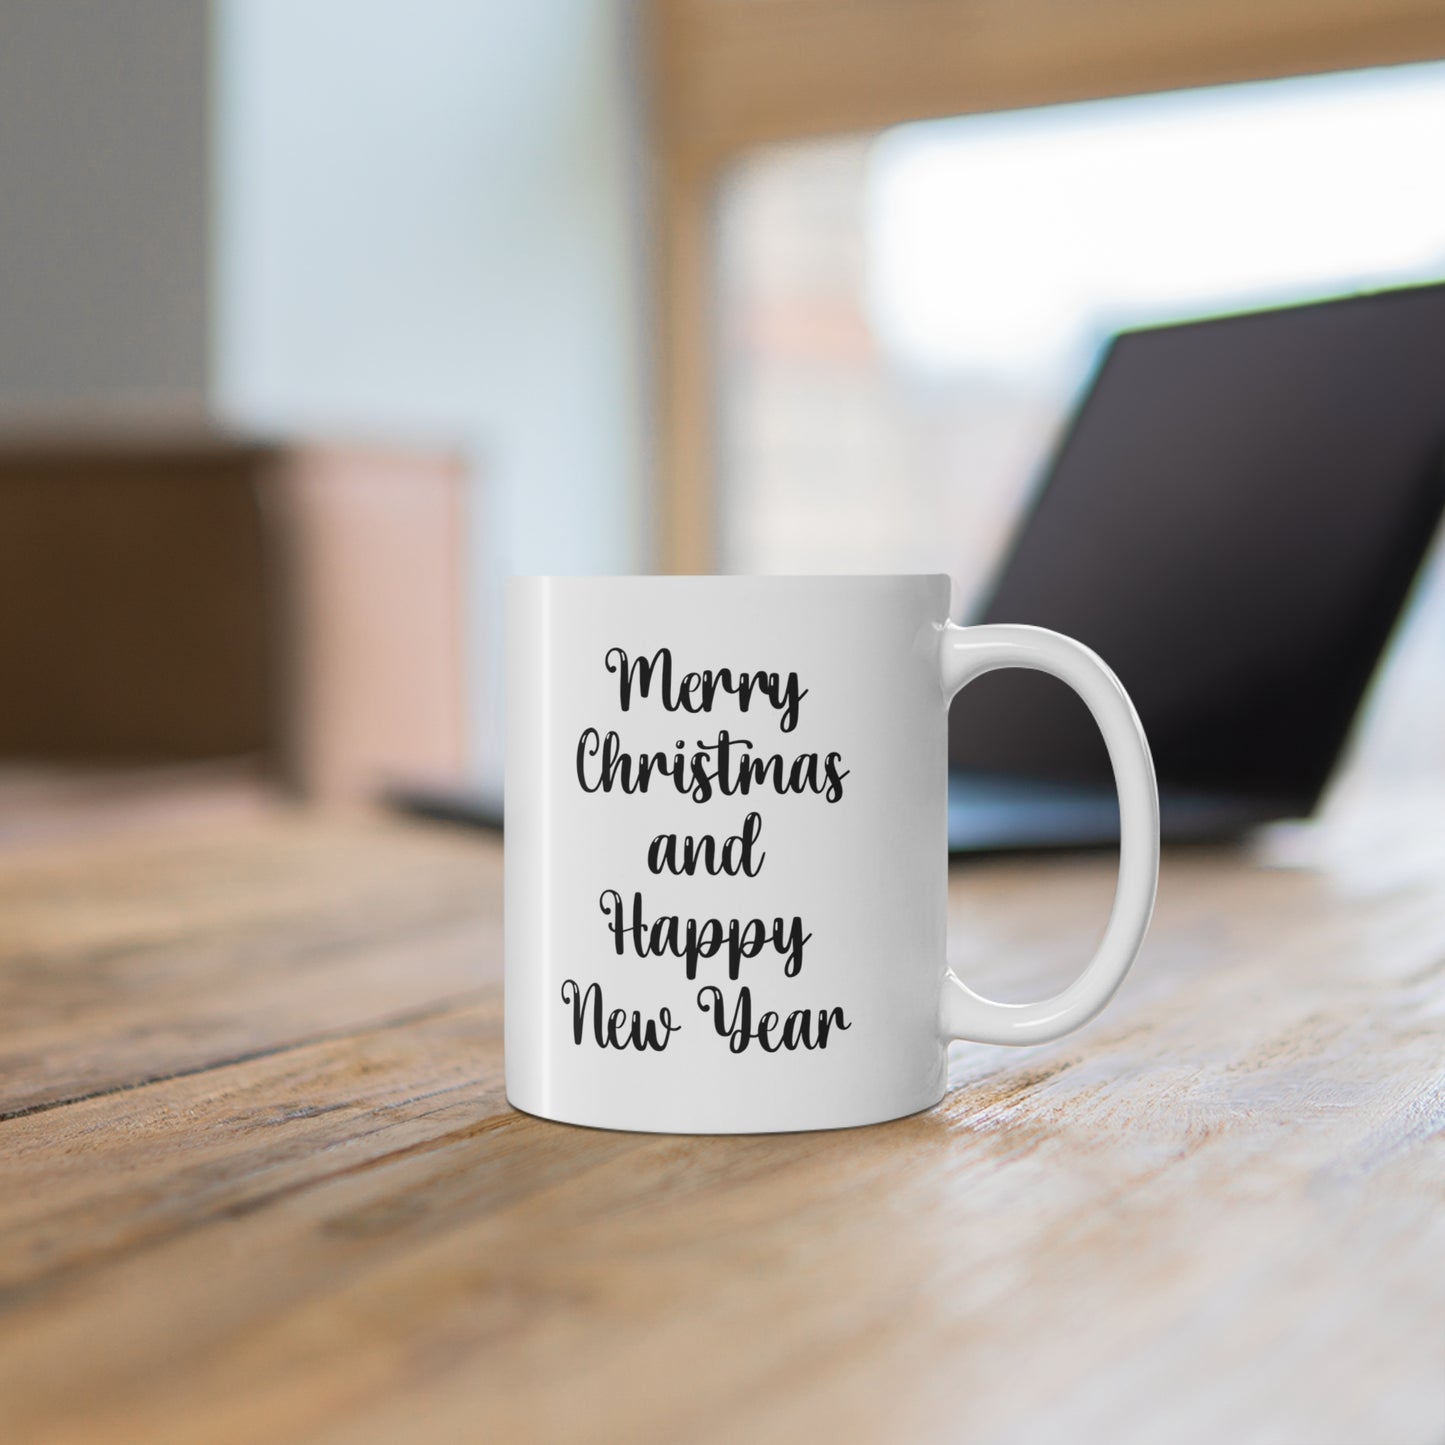 11oz ceramic mug with quote Merry Christmas and Happy New Year